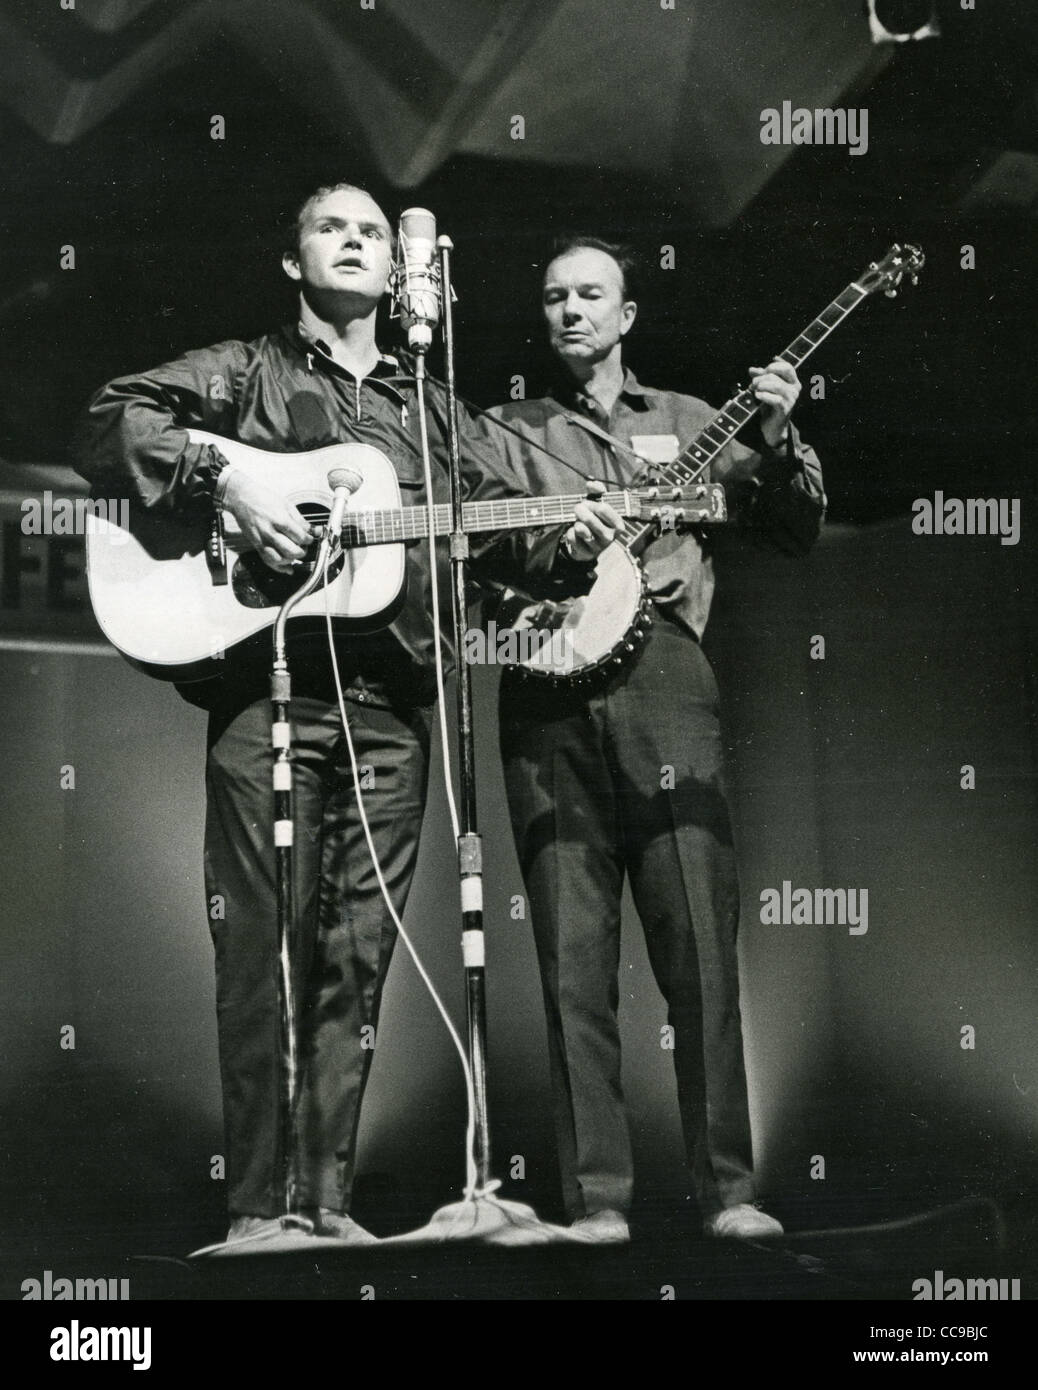 TOM PAXTON US cantante folk a sinistra con Peter Seeger circa 1968 Foto Stock